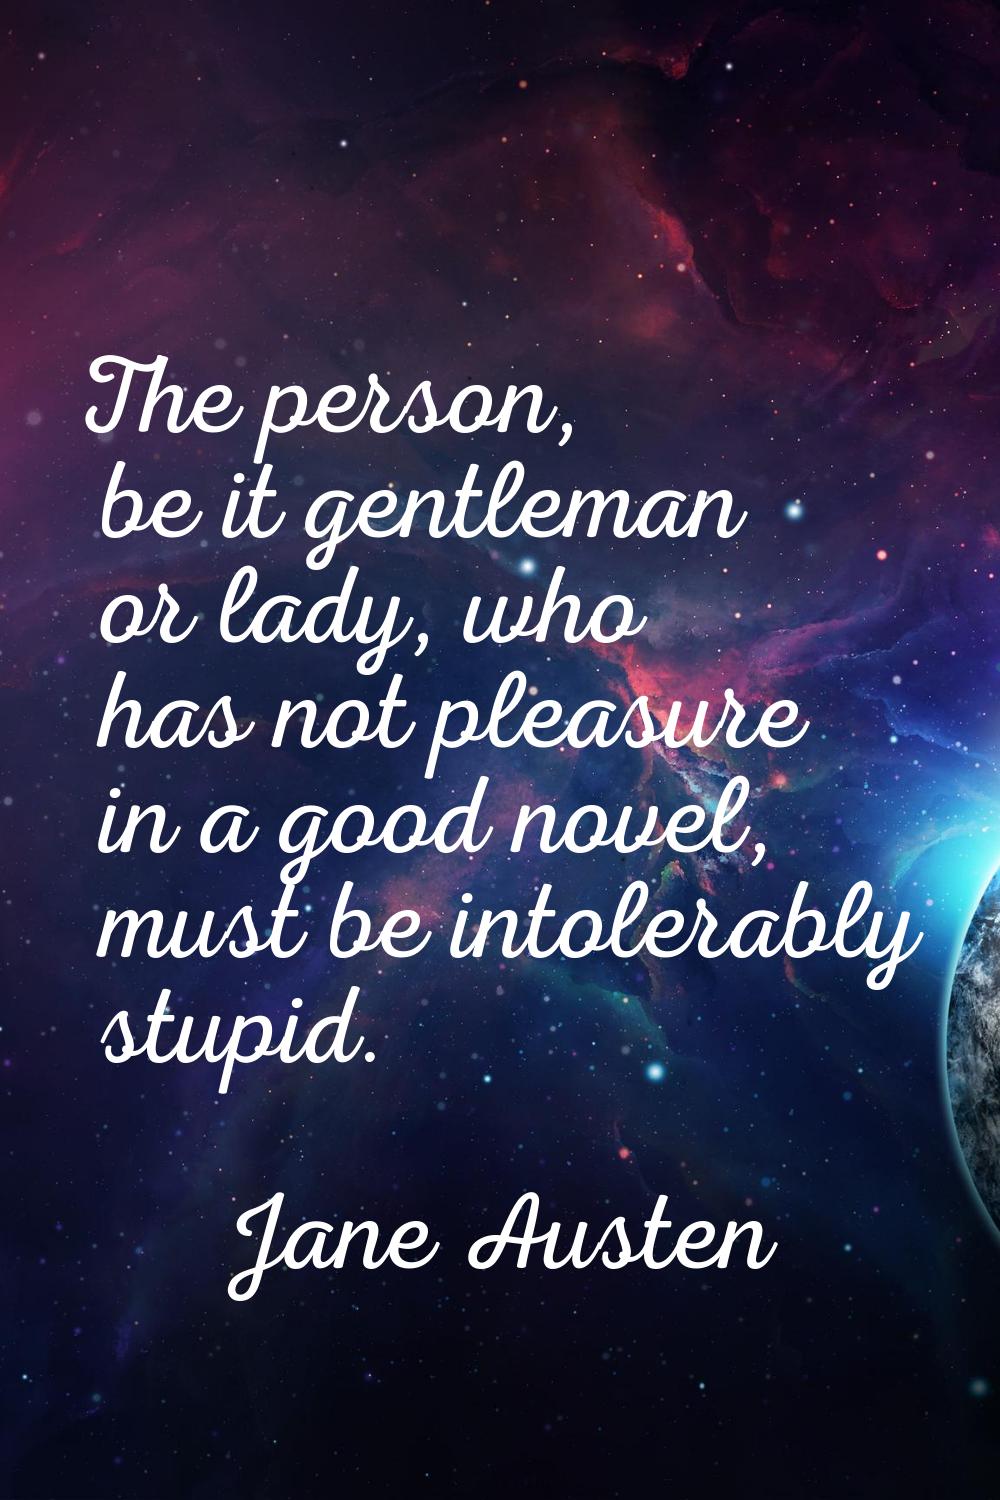 The person, be it gentleman or lady, who has not pleasure in a good novel, must be intolerably stup